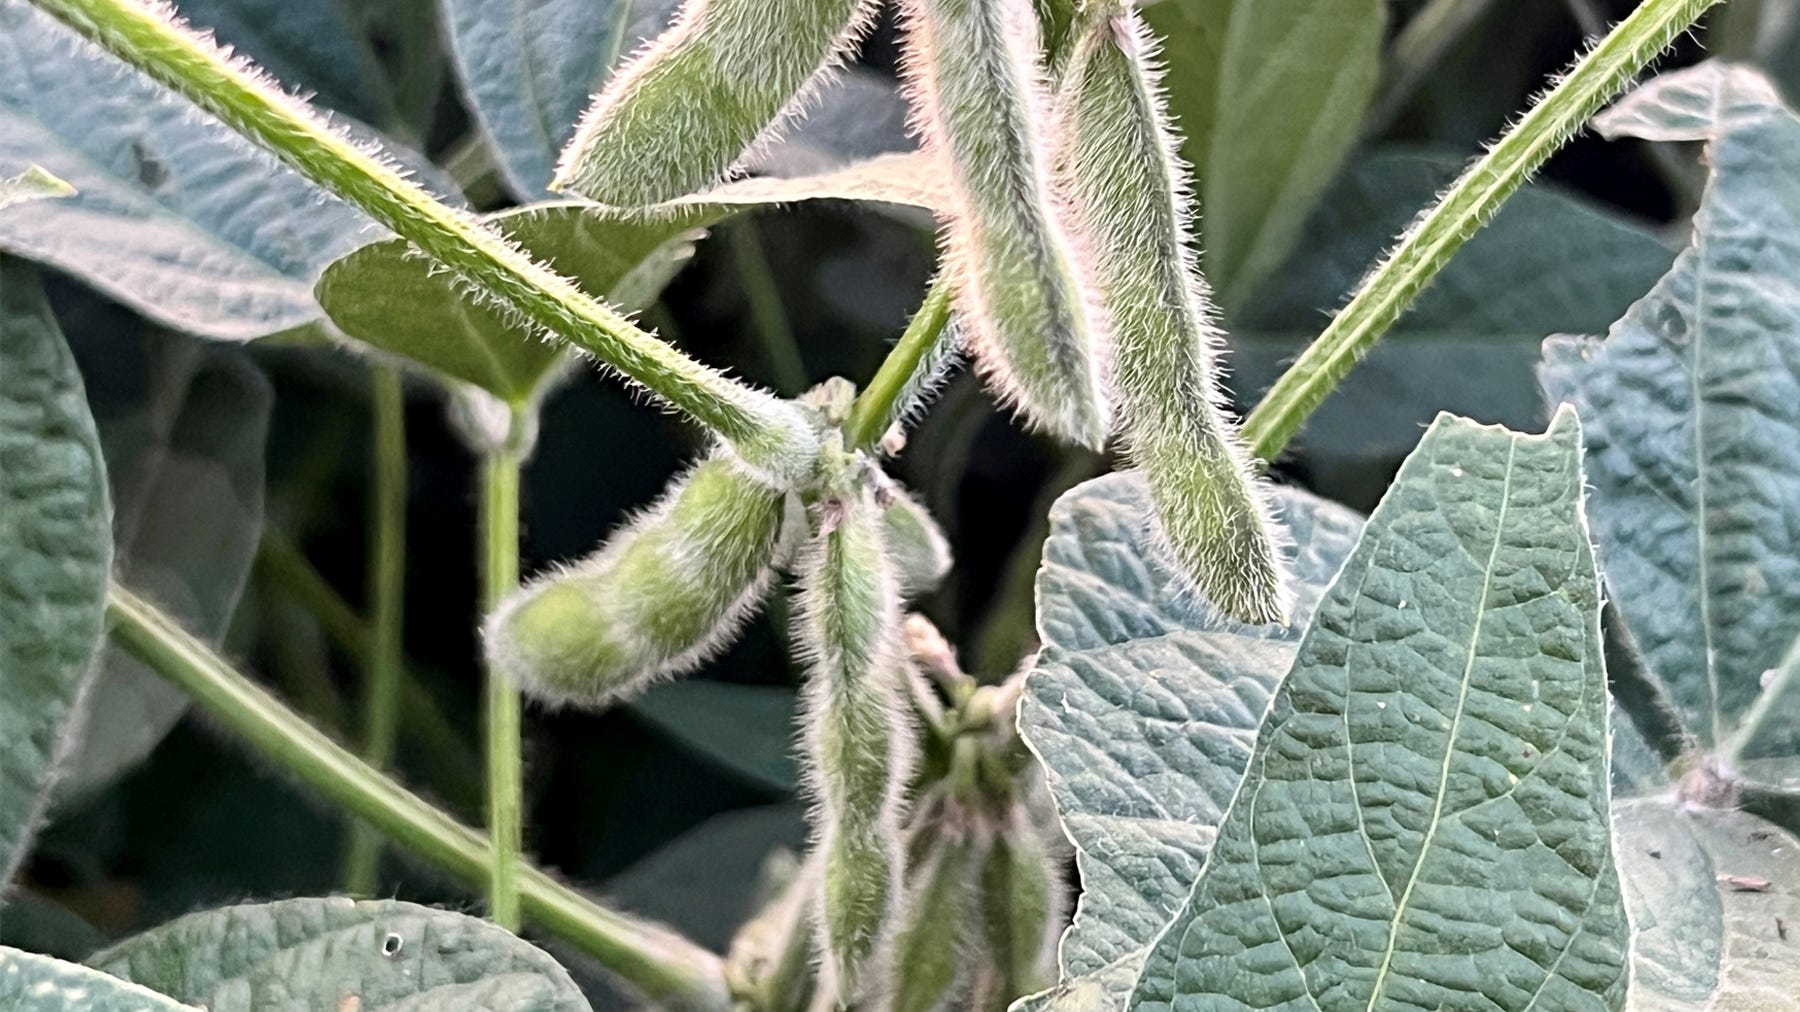 soybean pods growing on plant